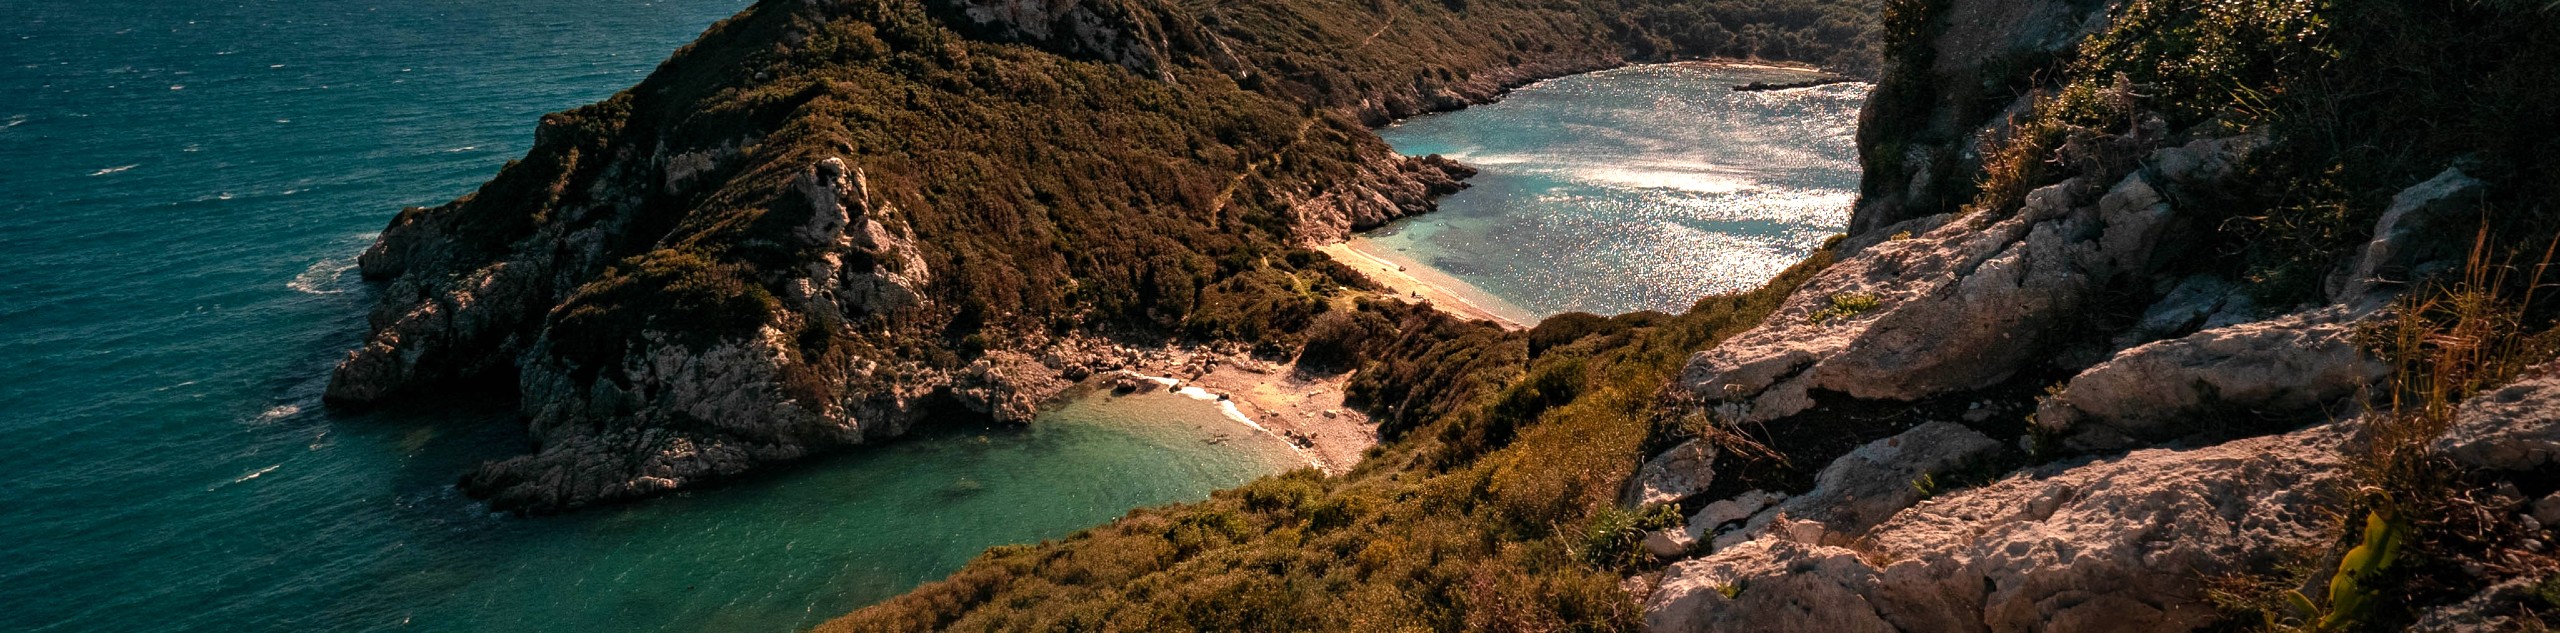 Two secluded beaches in Corfu, Greece